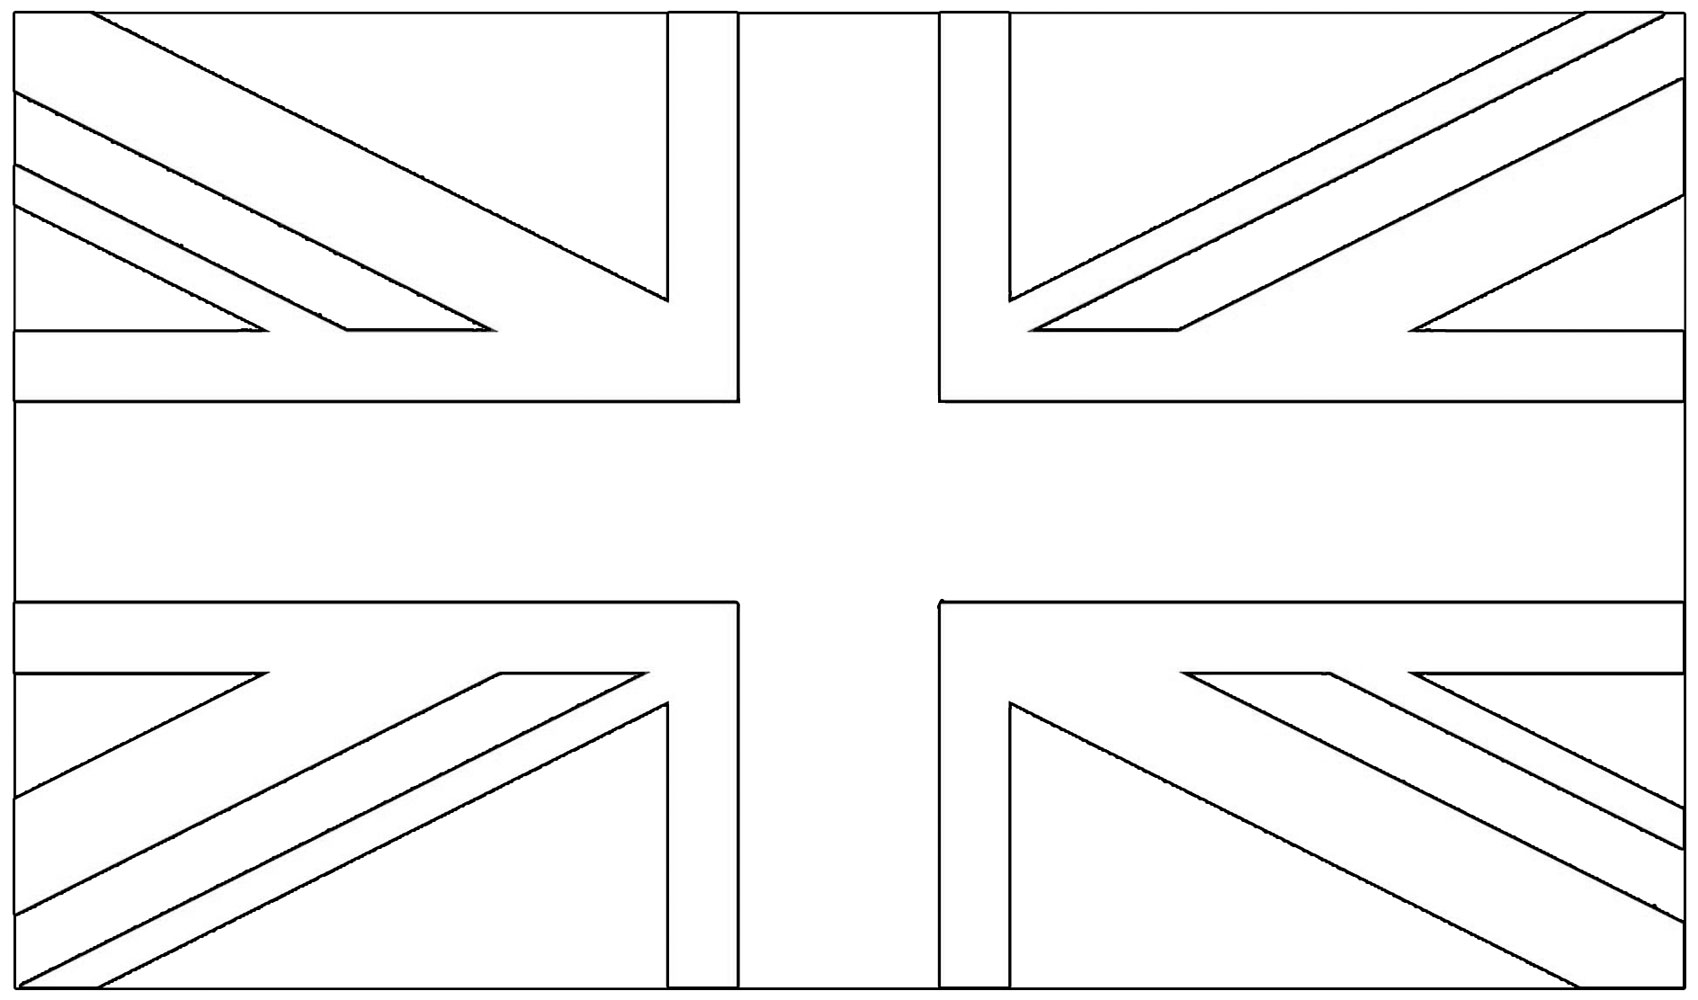 Blank Flag Coloring Pages